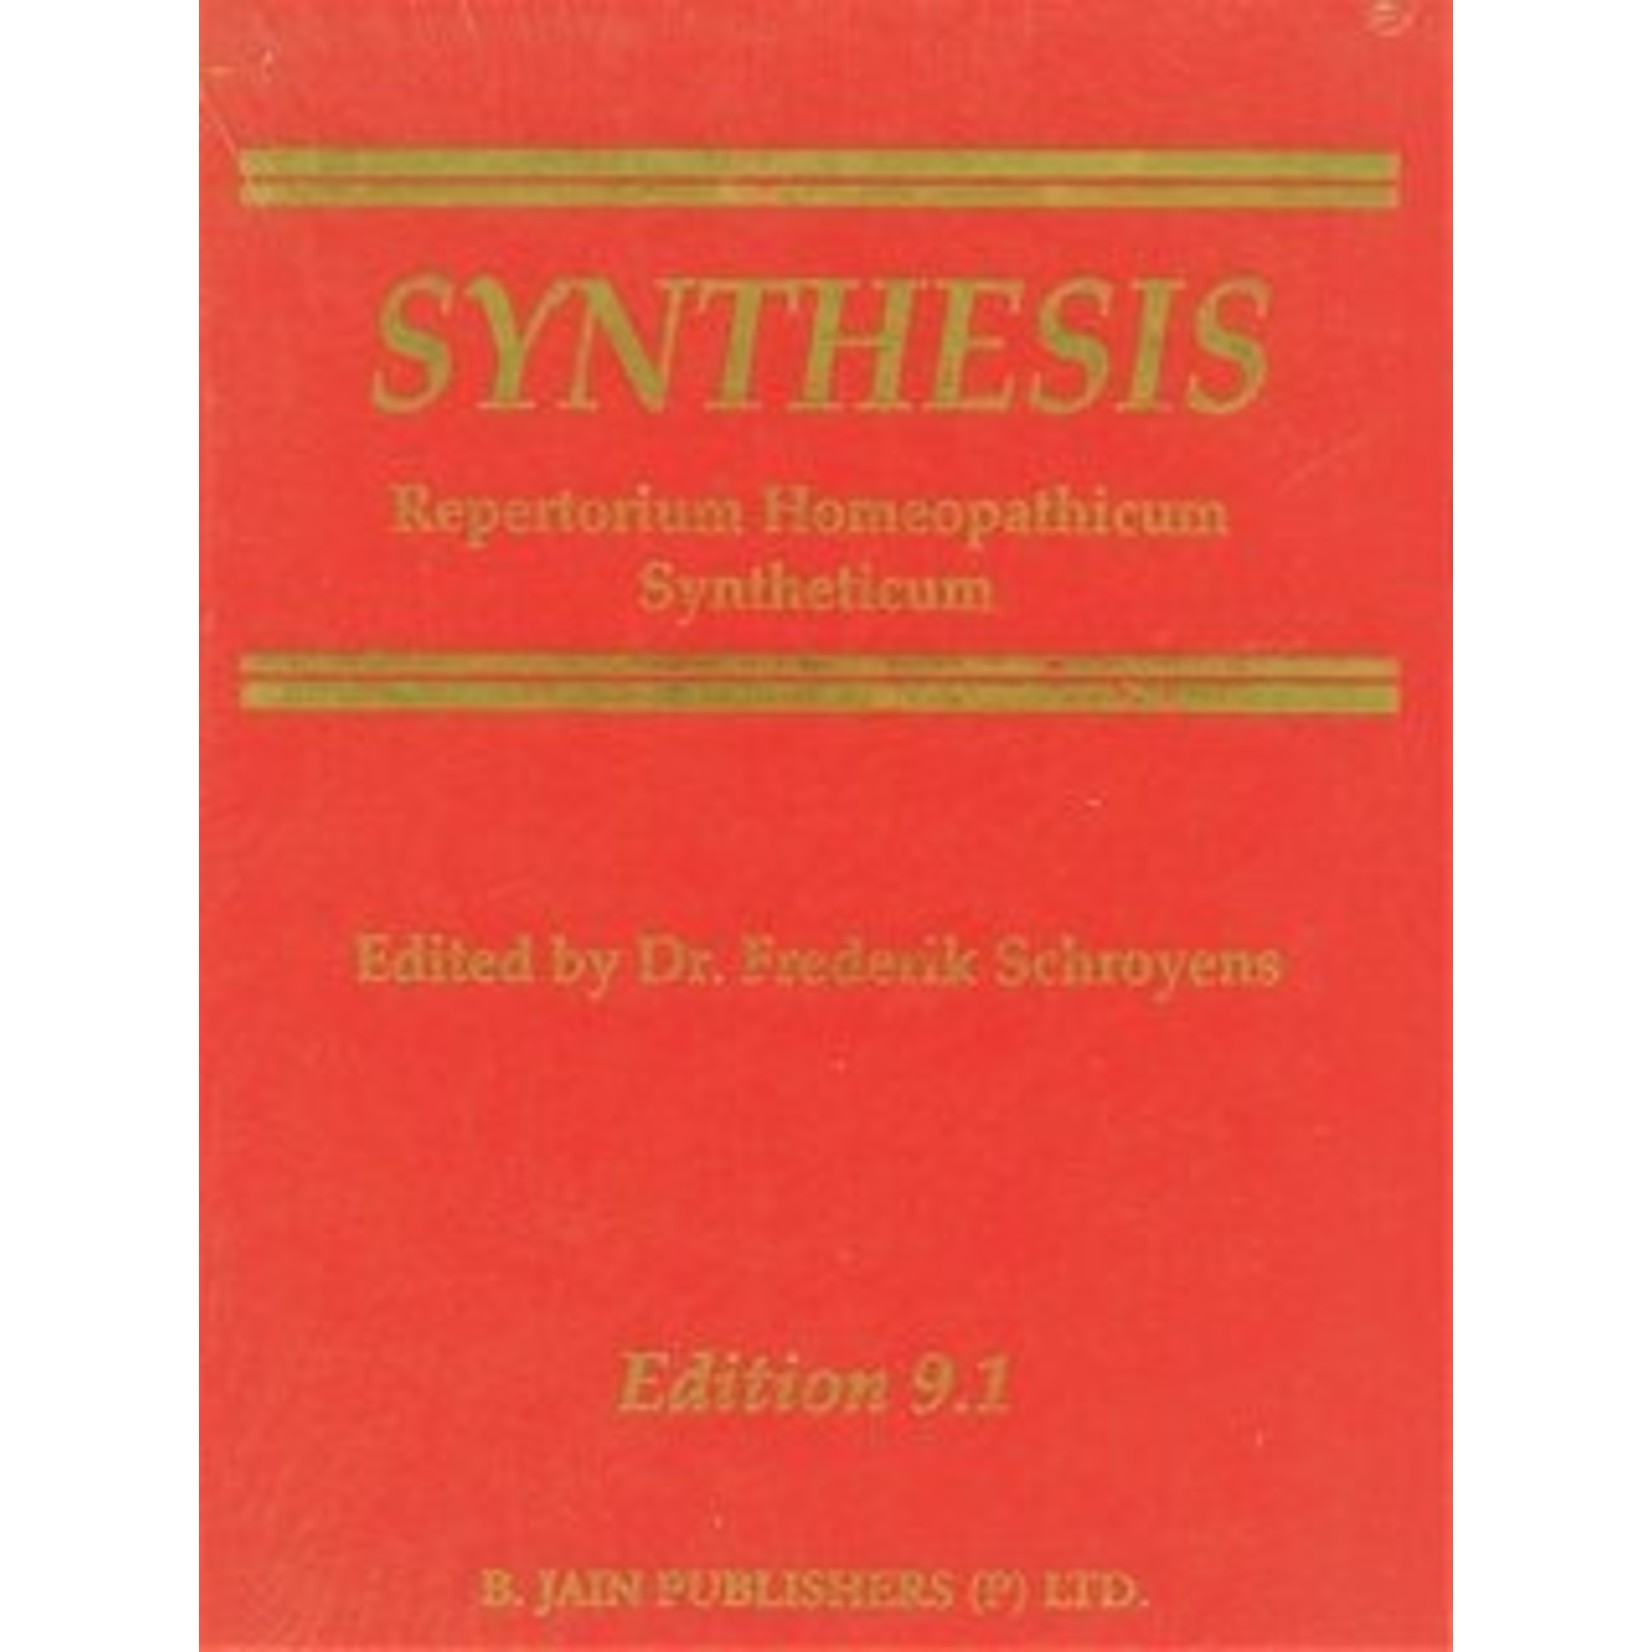 SYNTHESIS REPERTORIUM HOMEOPATHY